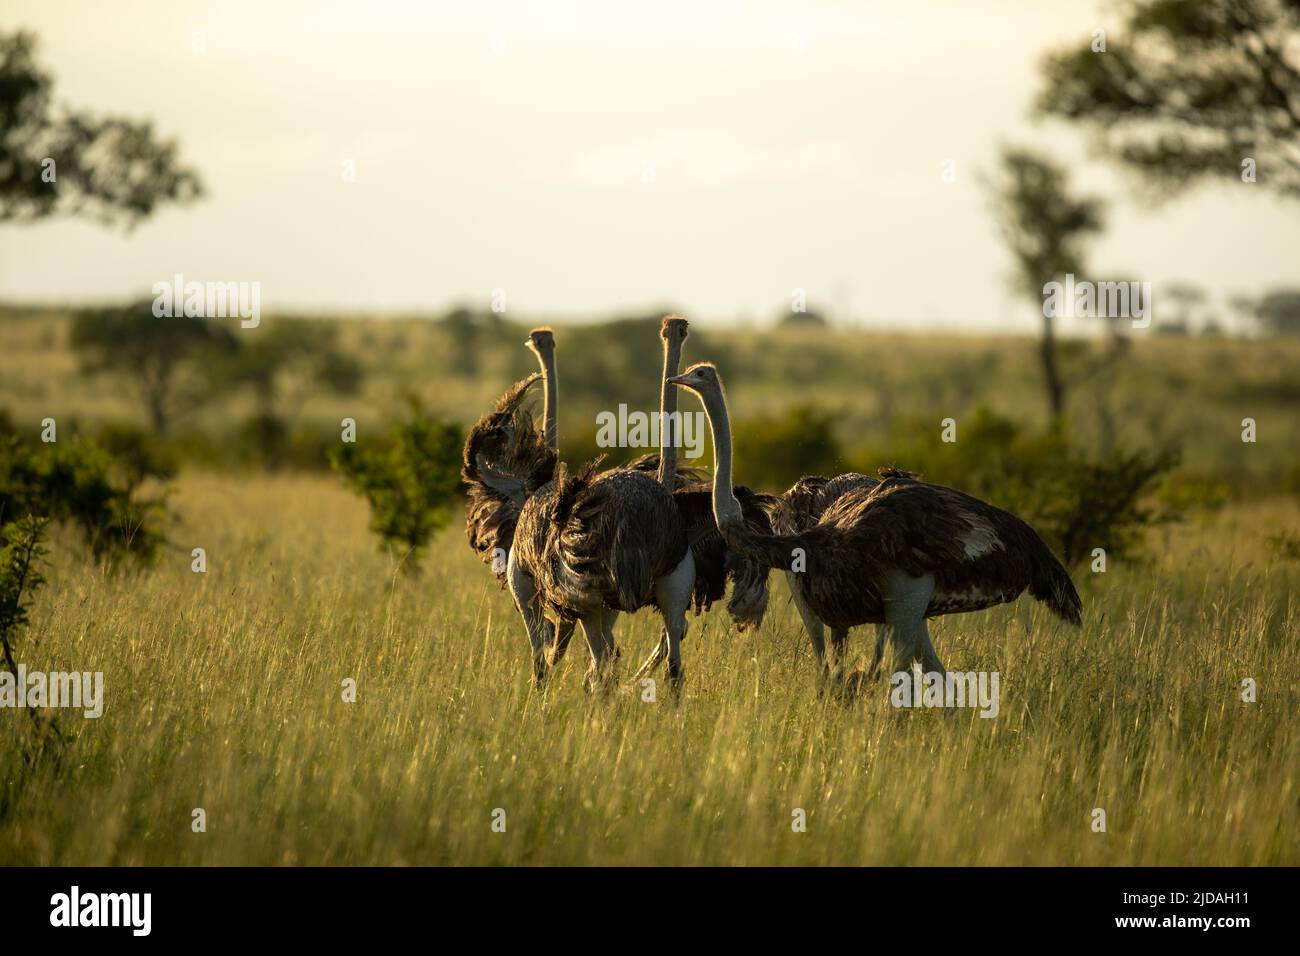 Three ostriches, Struthio camelus, stand together in the evening light Stock Photo